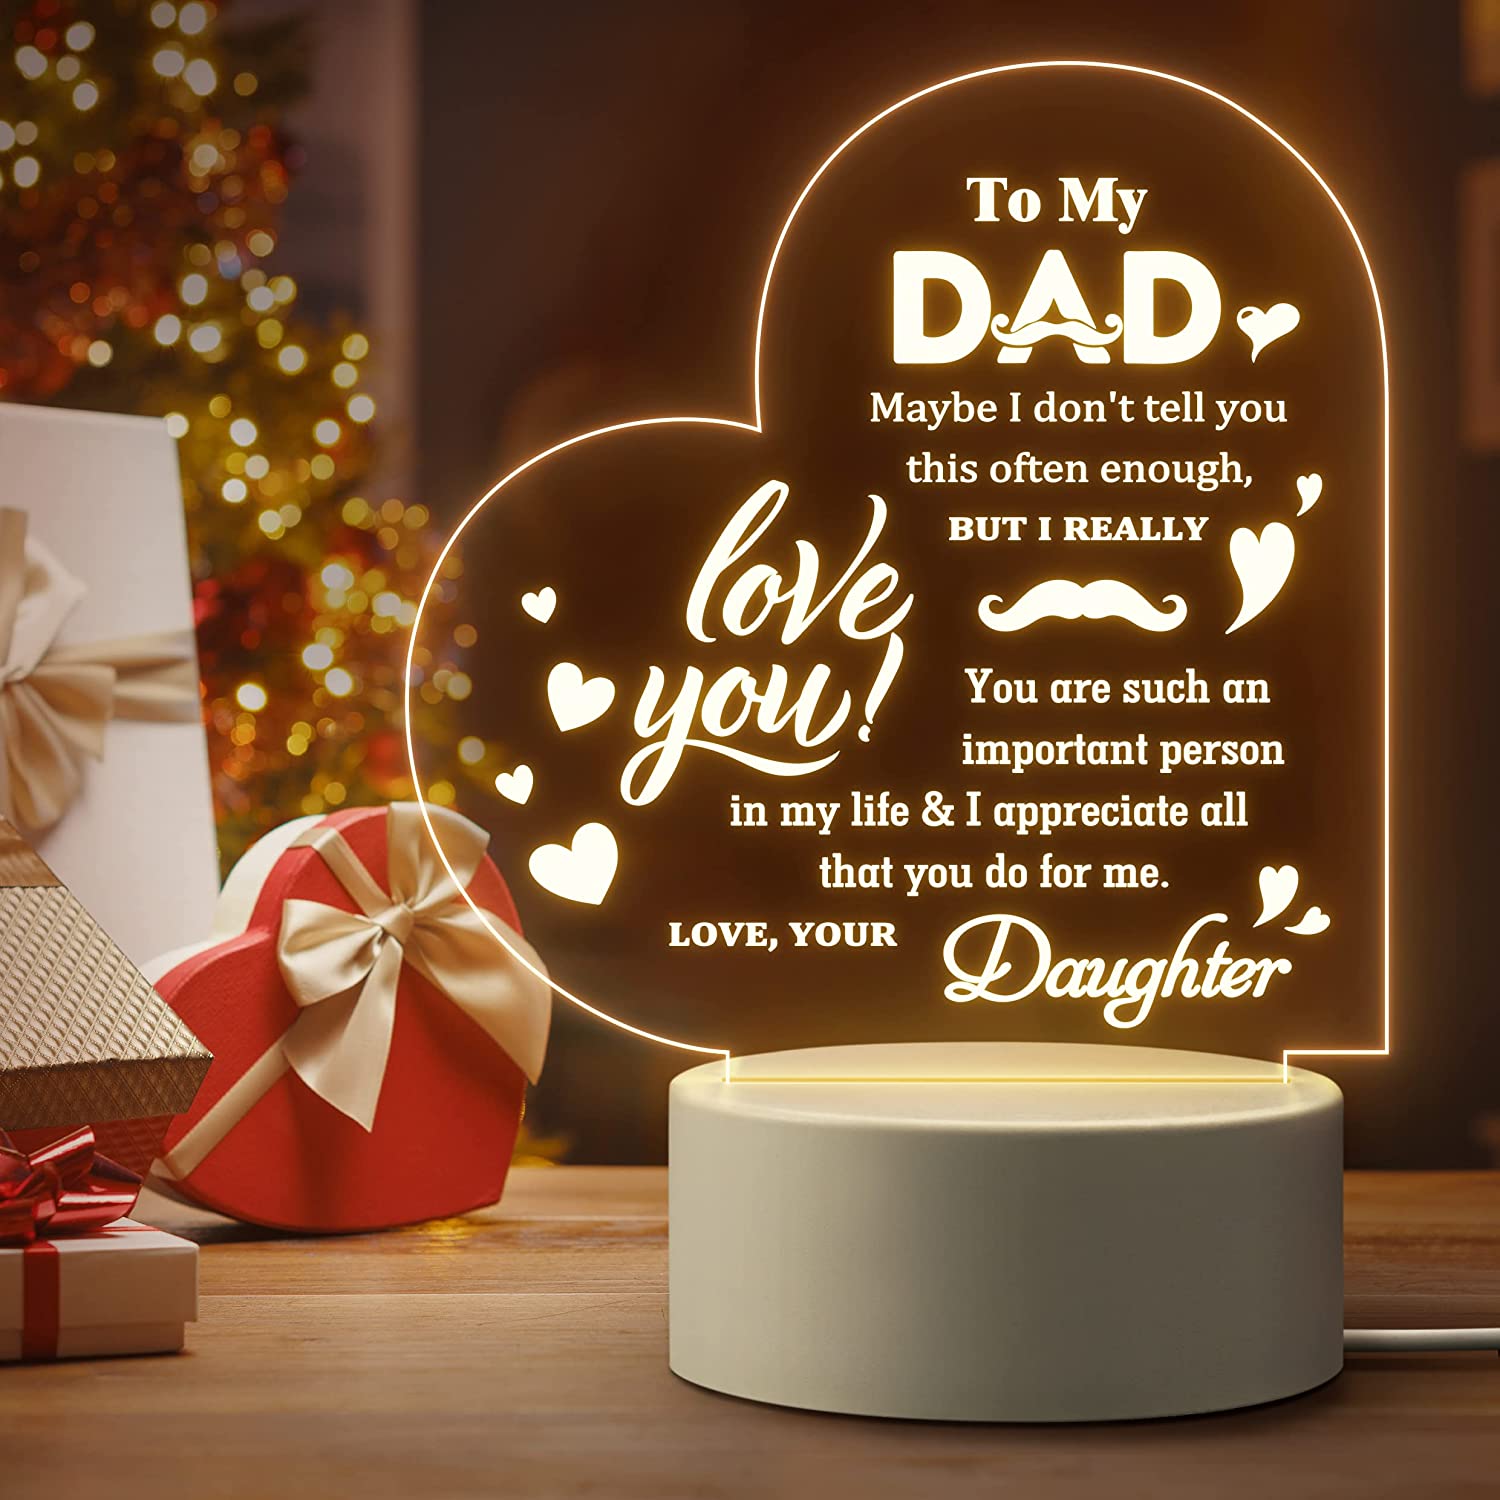 The 49 Best Christmas Gifts for Dad: Gift Ideas for Dads